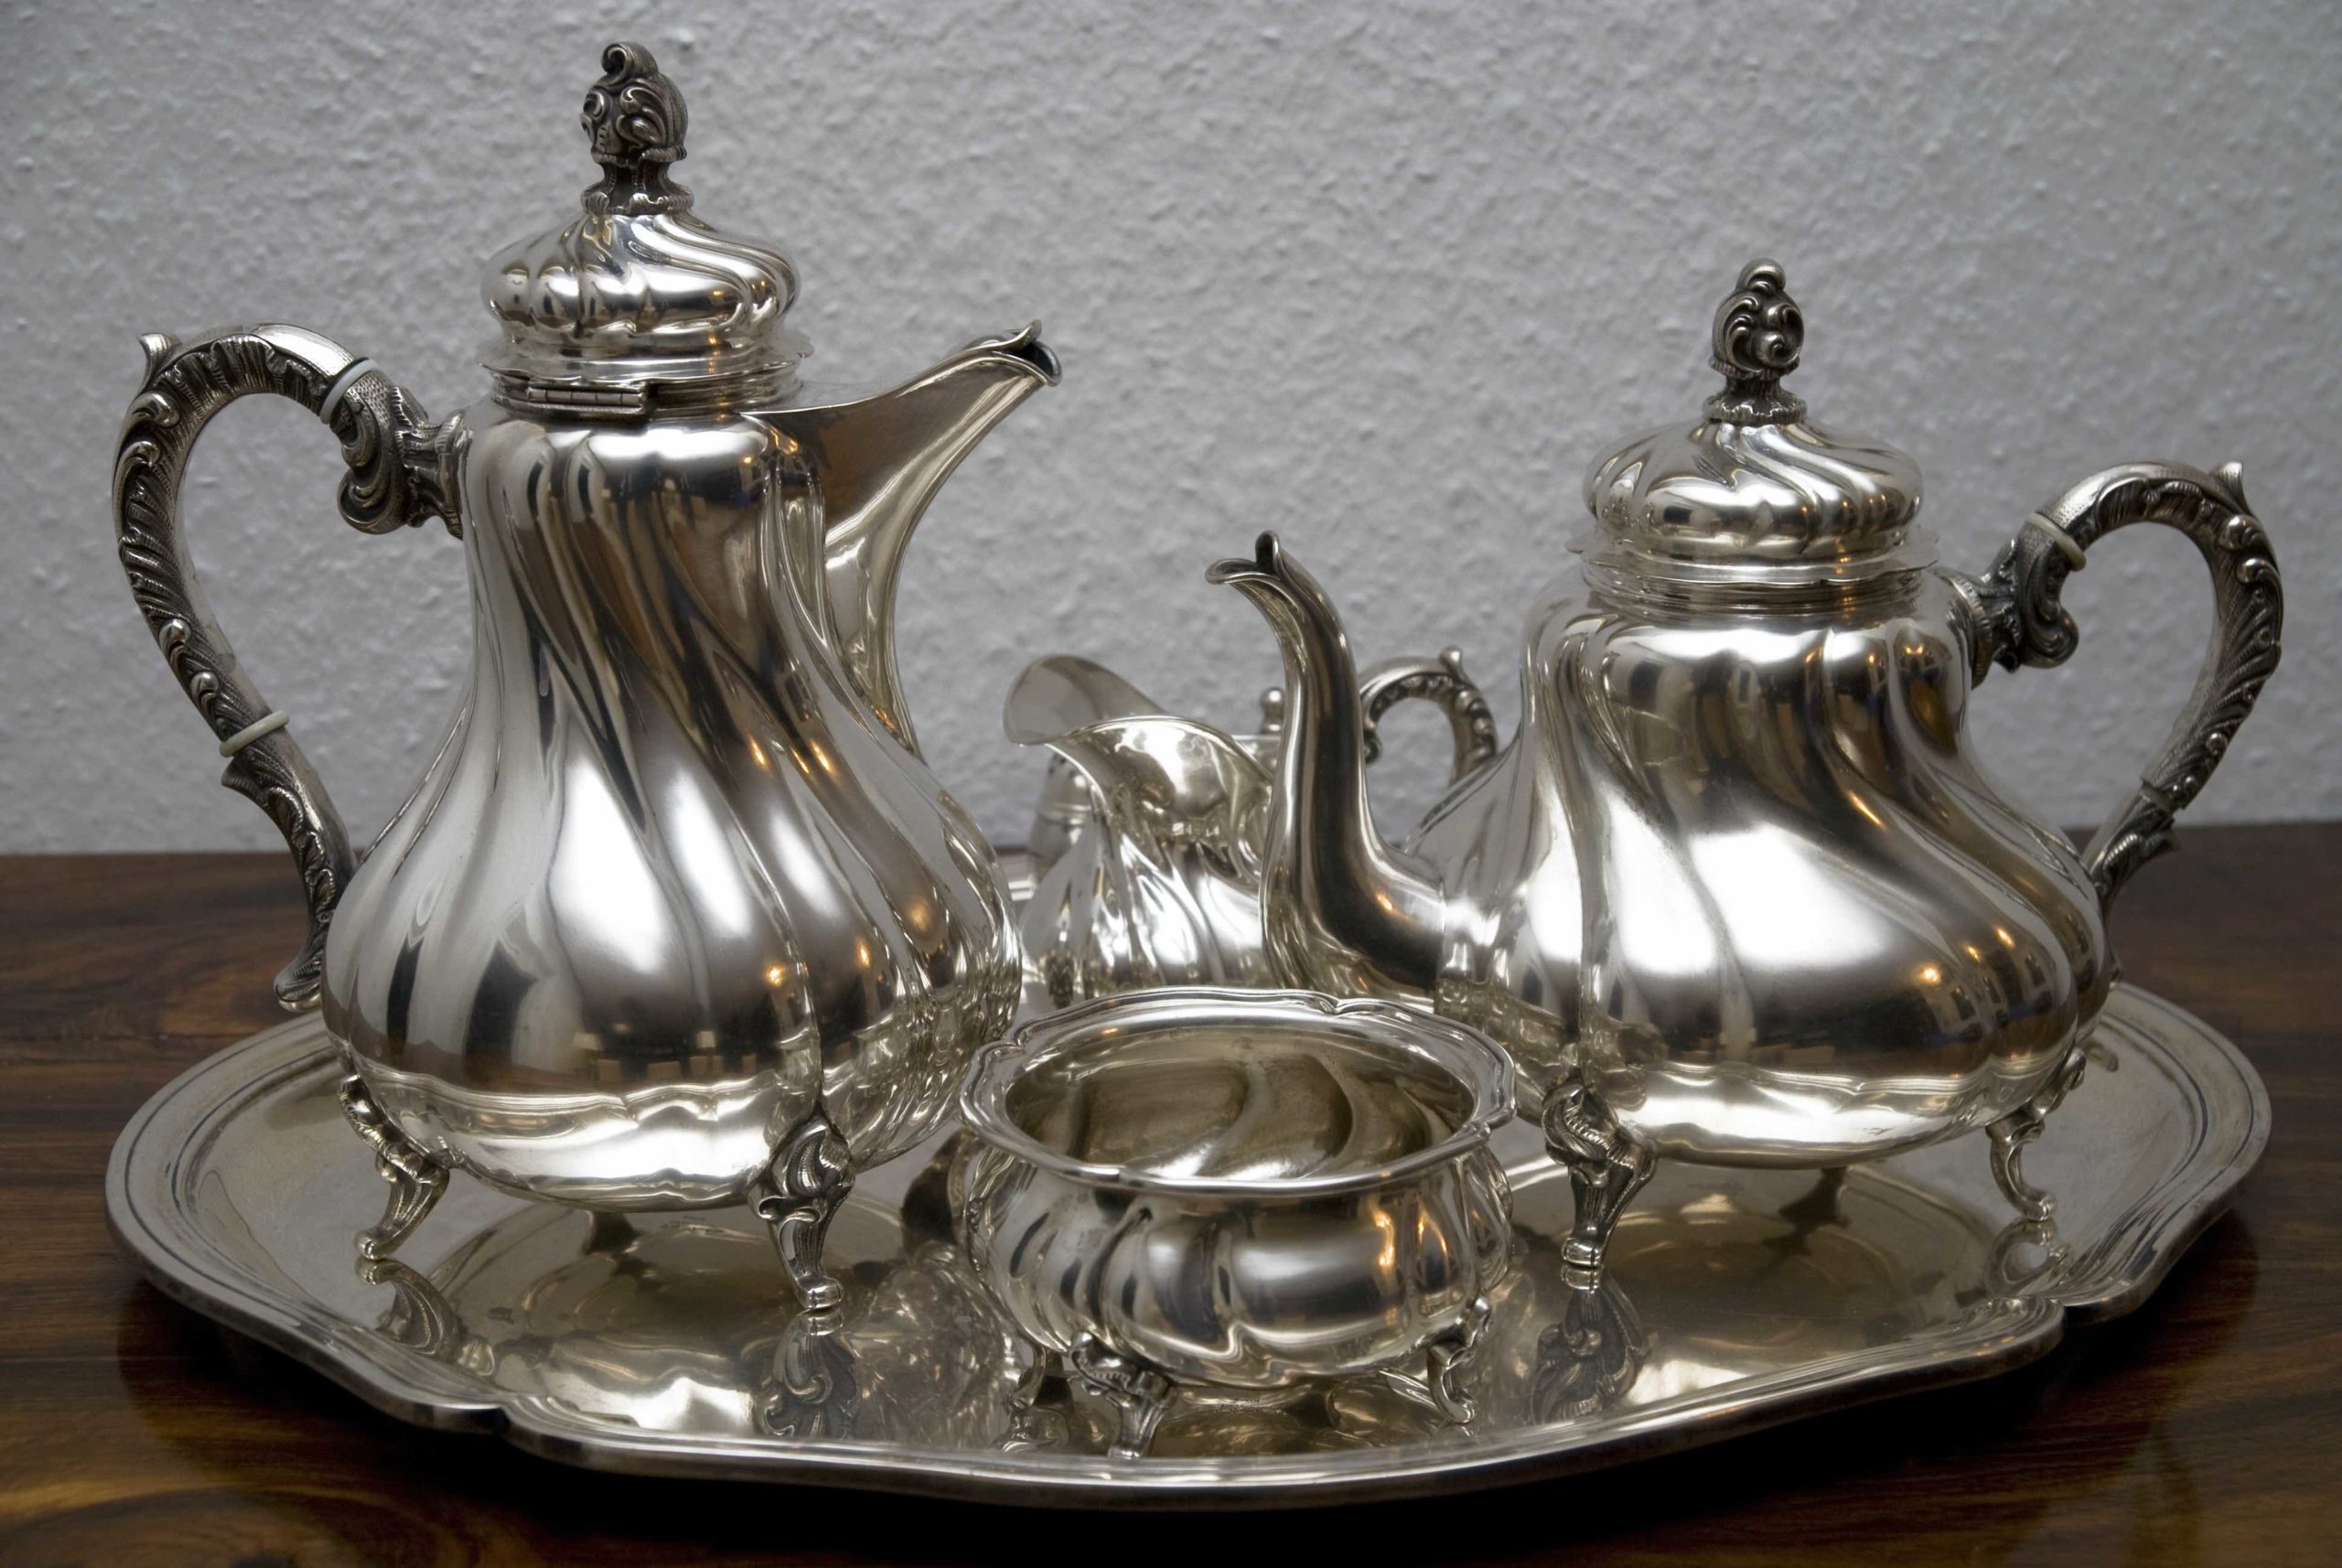 Ready to Sell Your Inherited Silver Items? Here's What to Expect. How